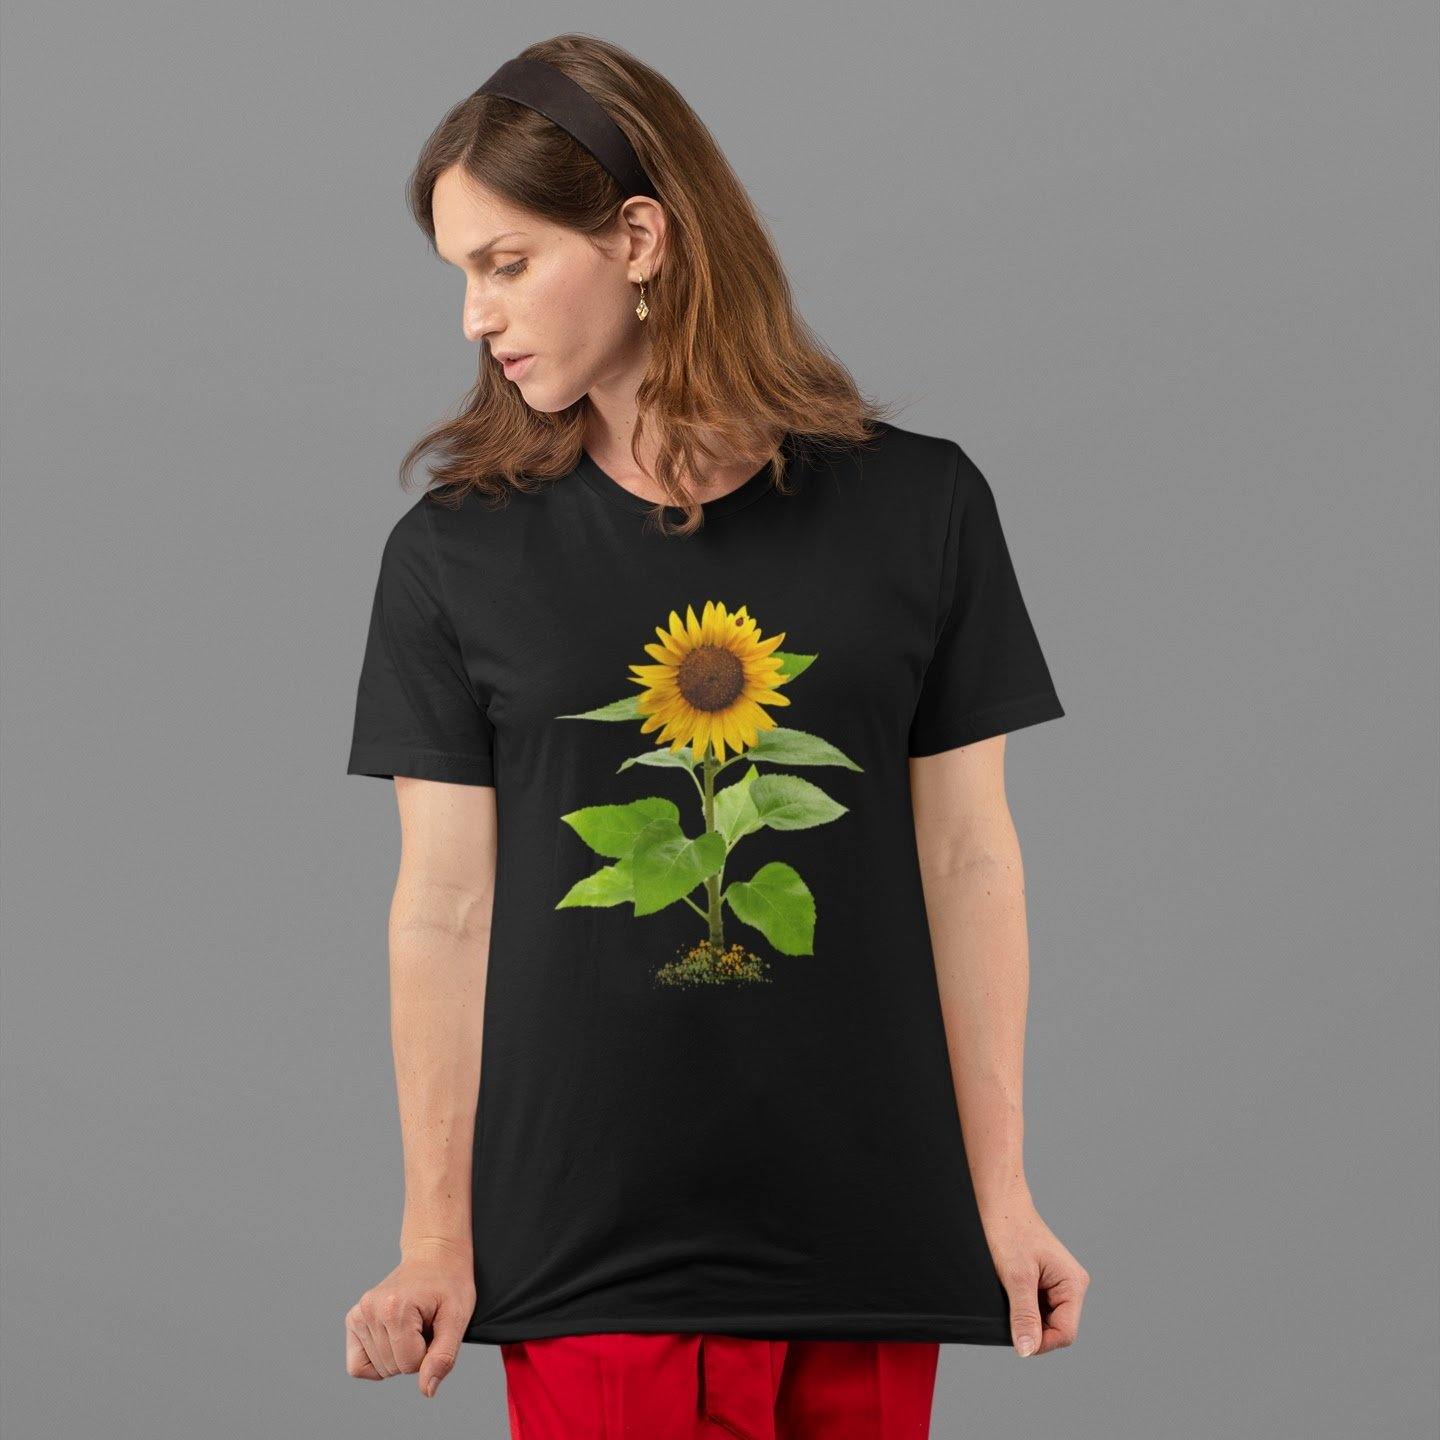 Mock up of a woman wearing out black Unisex Sunflower T-shirt